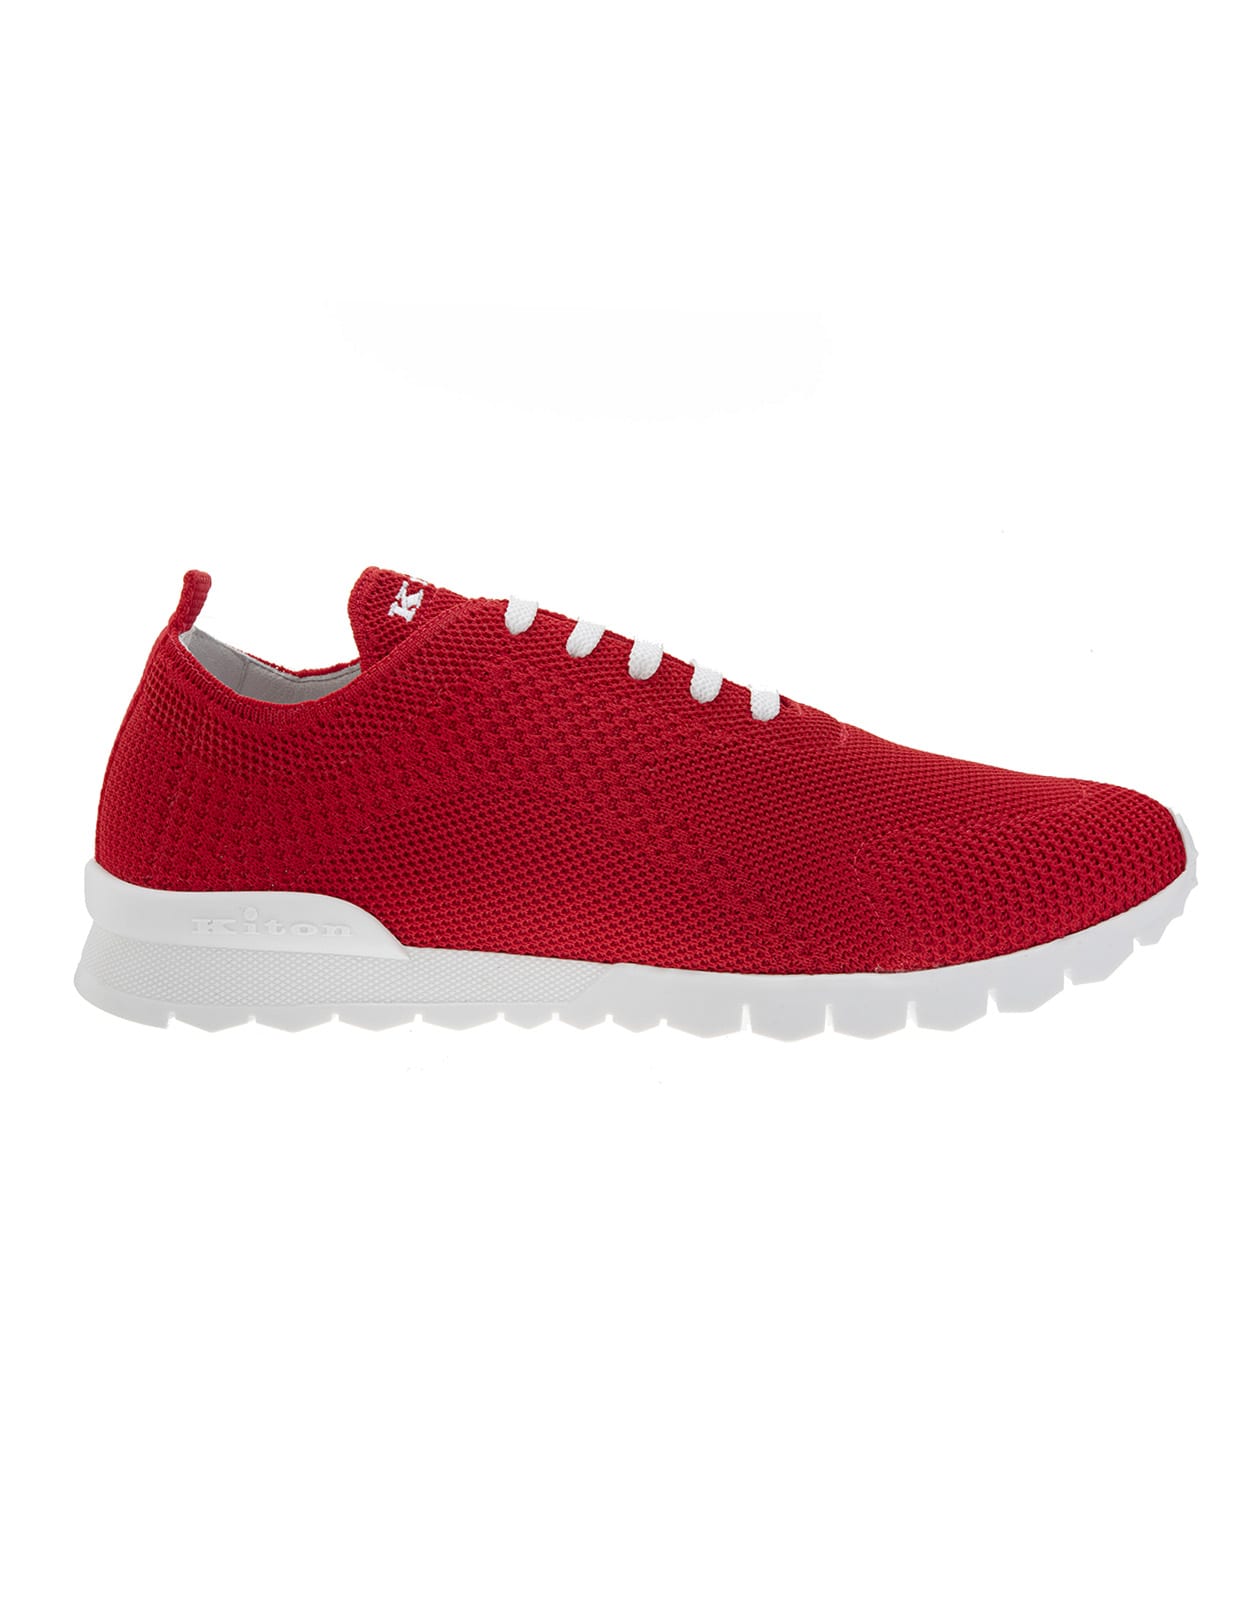 KITON RED STRETCH KNIT MAN SNEAKERS,11811696